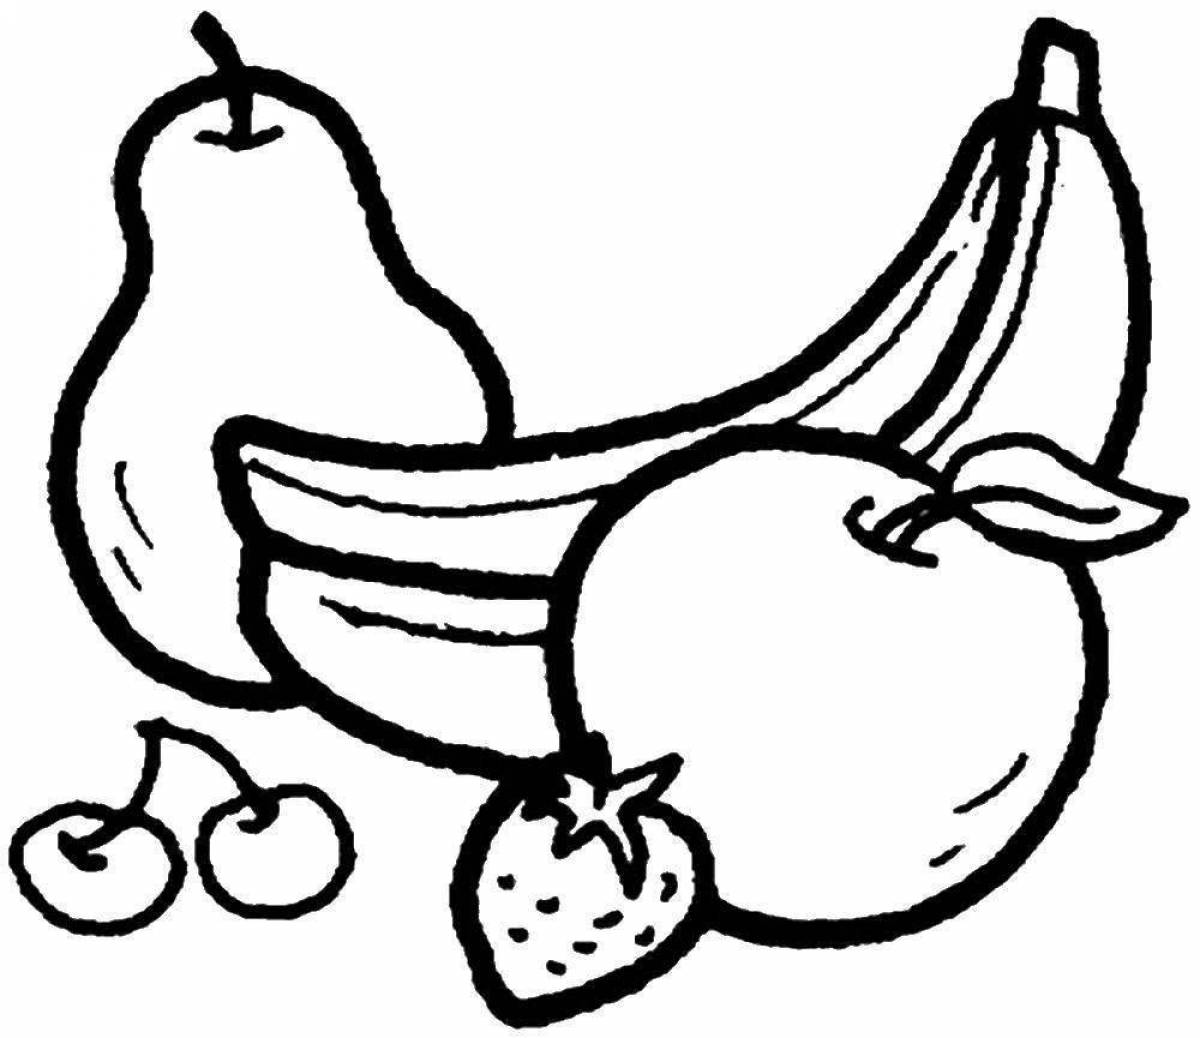 Charming grade 2 healthy nutrition coloring page